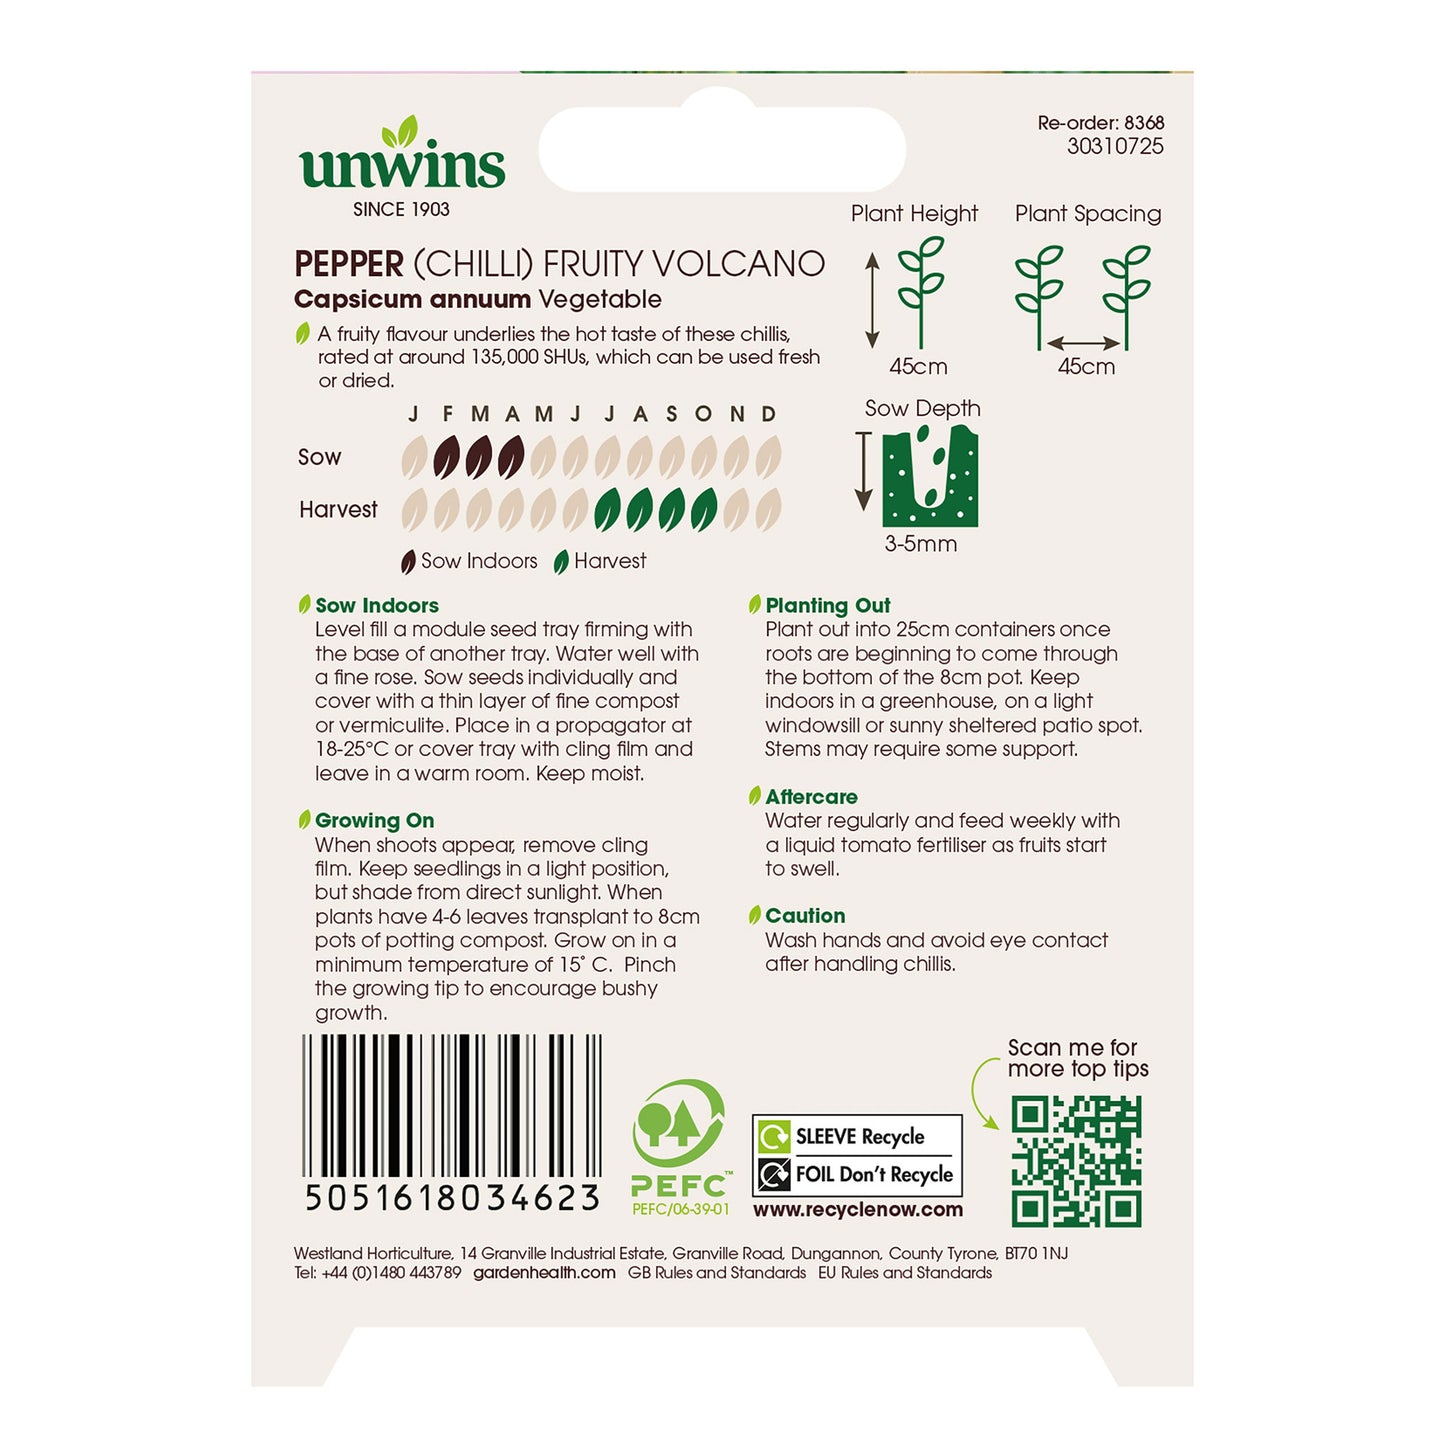 Unwins Chilli Pepper Fruity Volcano Seeds back of pack